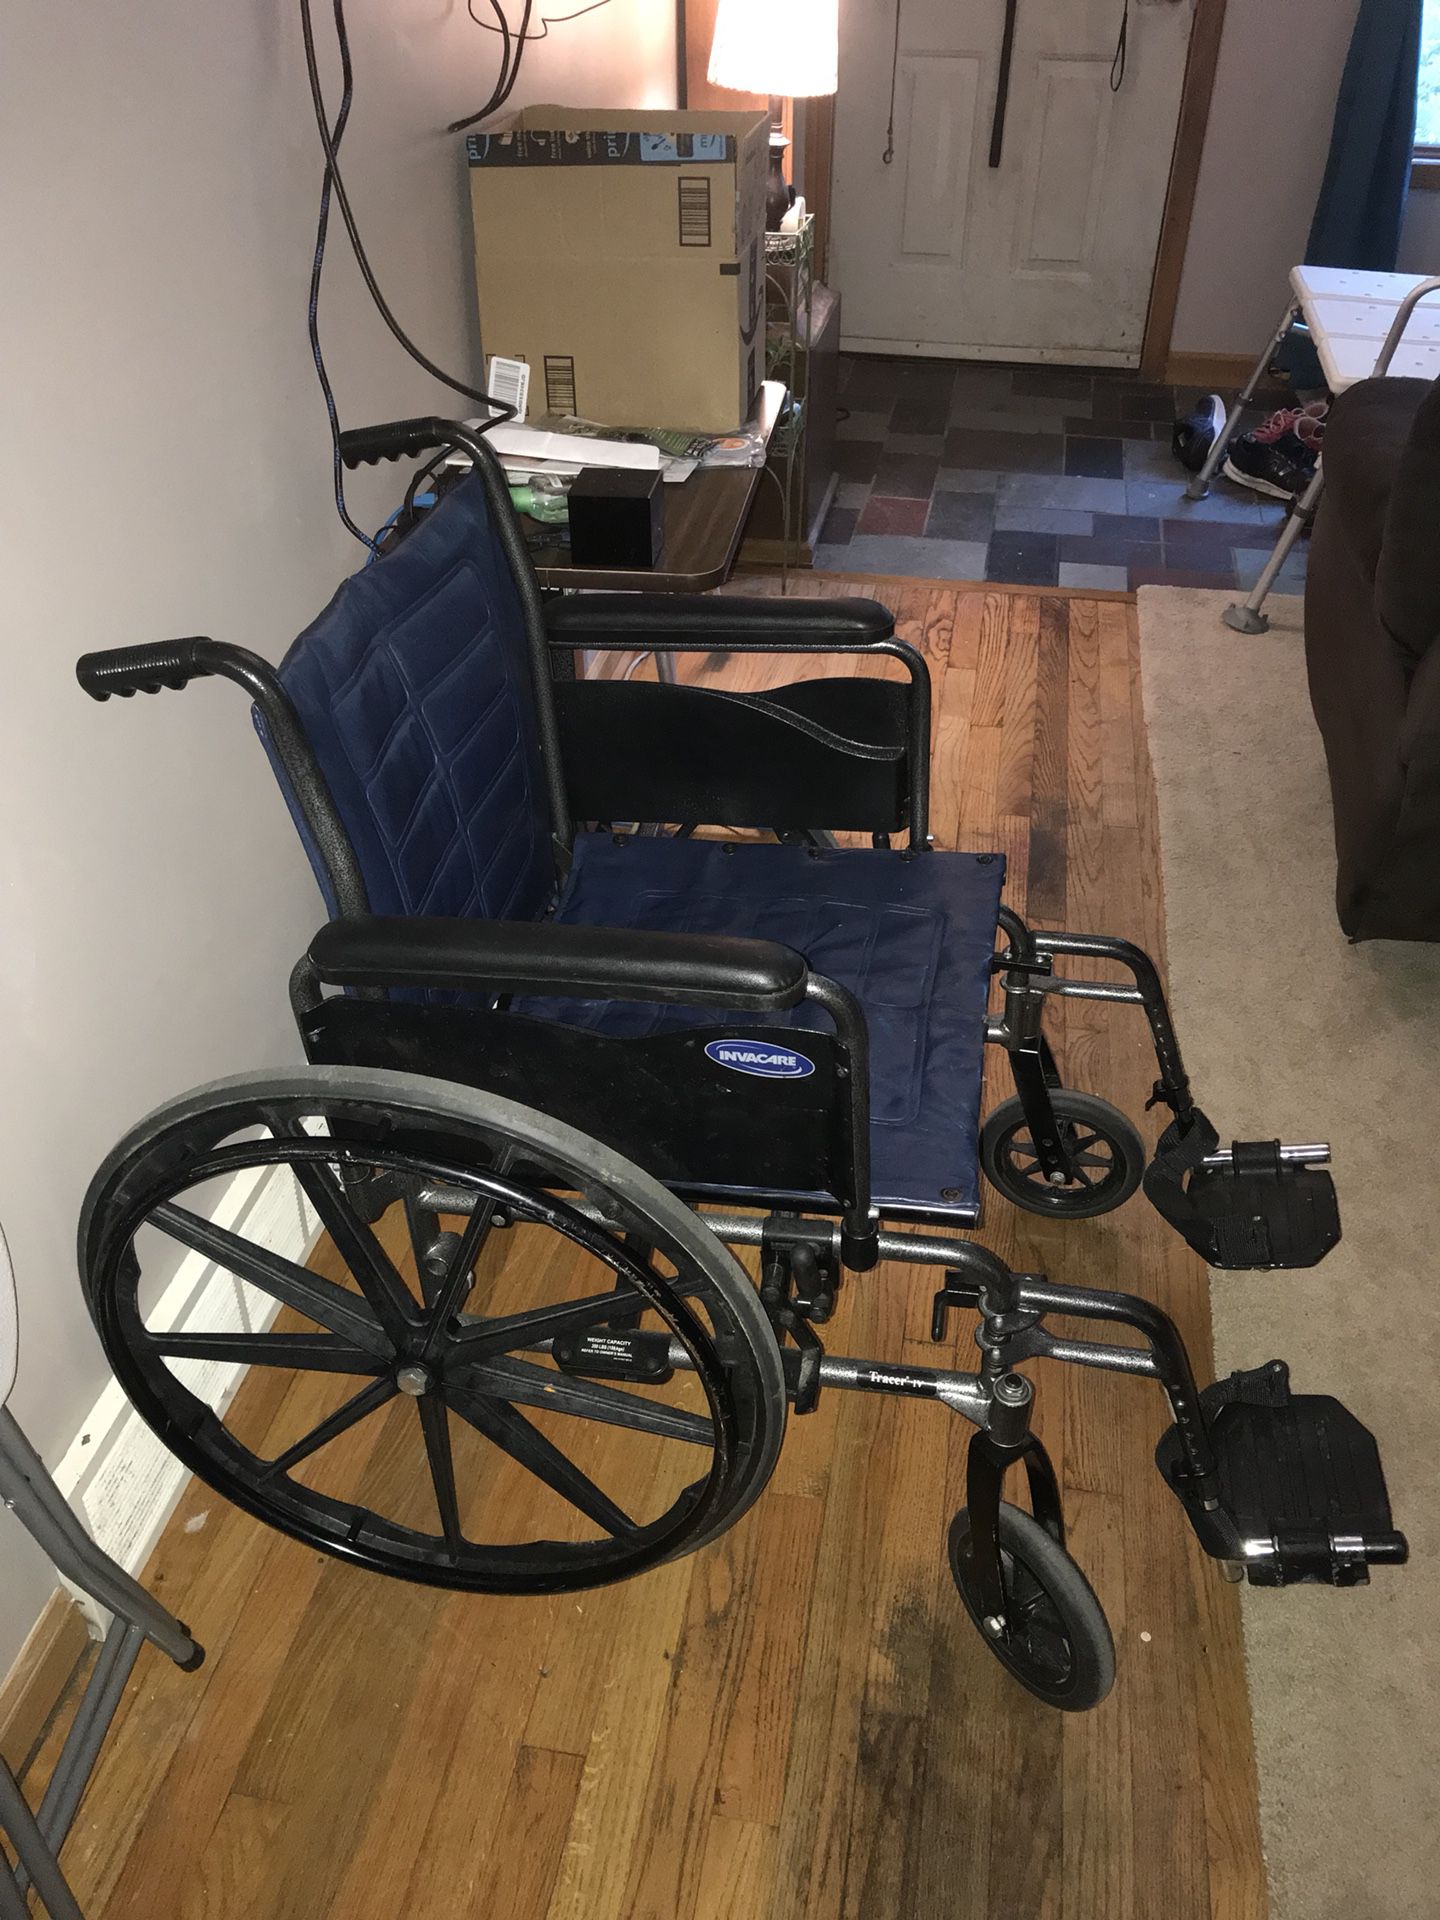 Invacare Tracer IV bariatric wheel chair